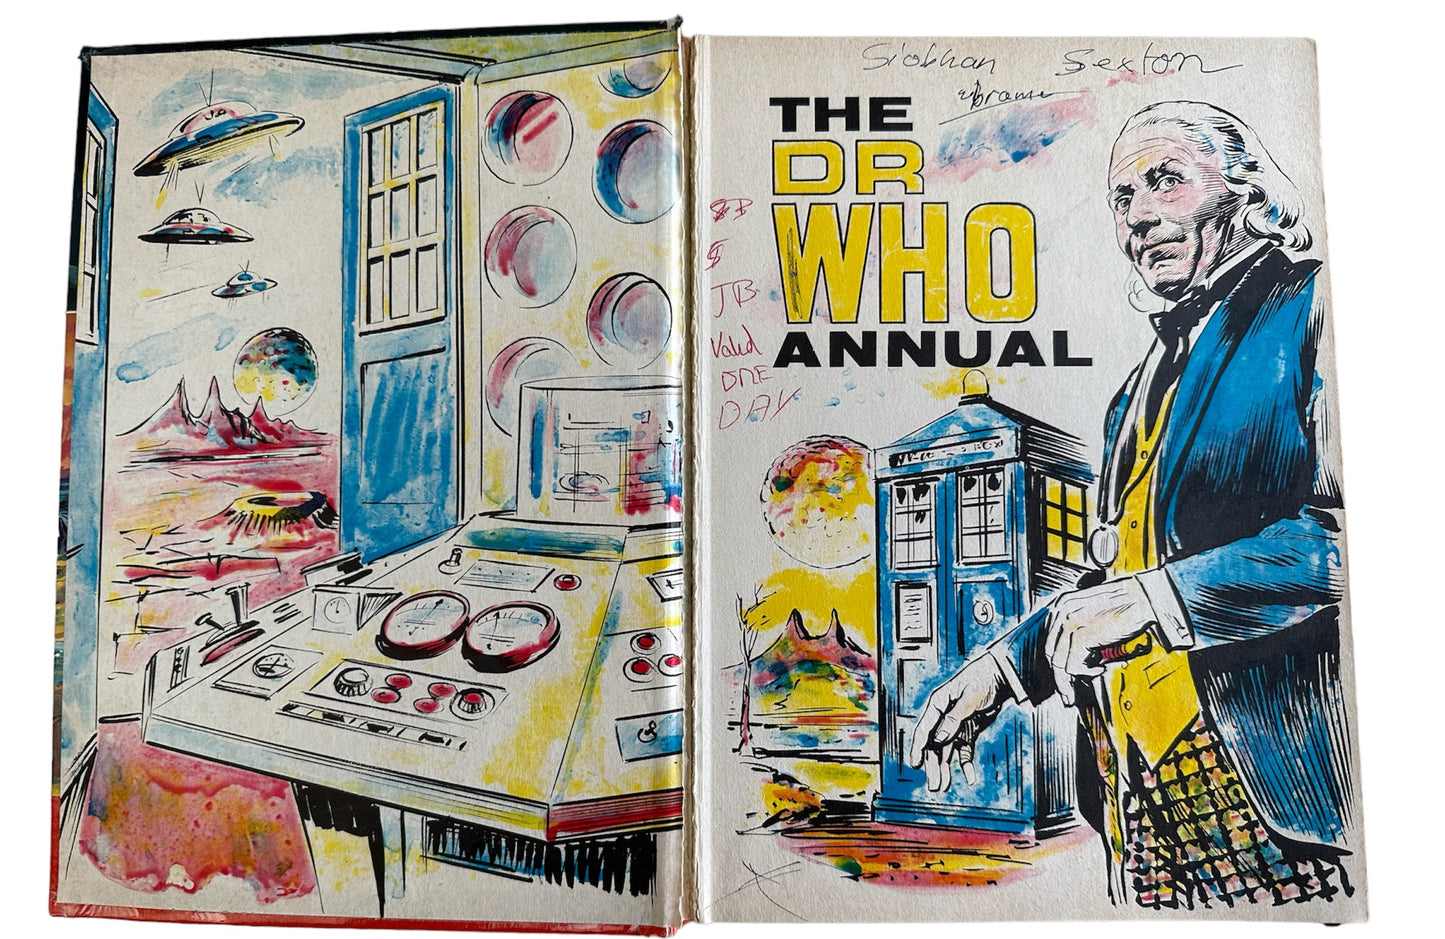 Vintage Dr Who Annual 1966 from the first Doctor William Hartnell era - Very Good Condition